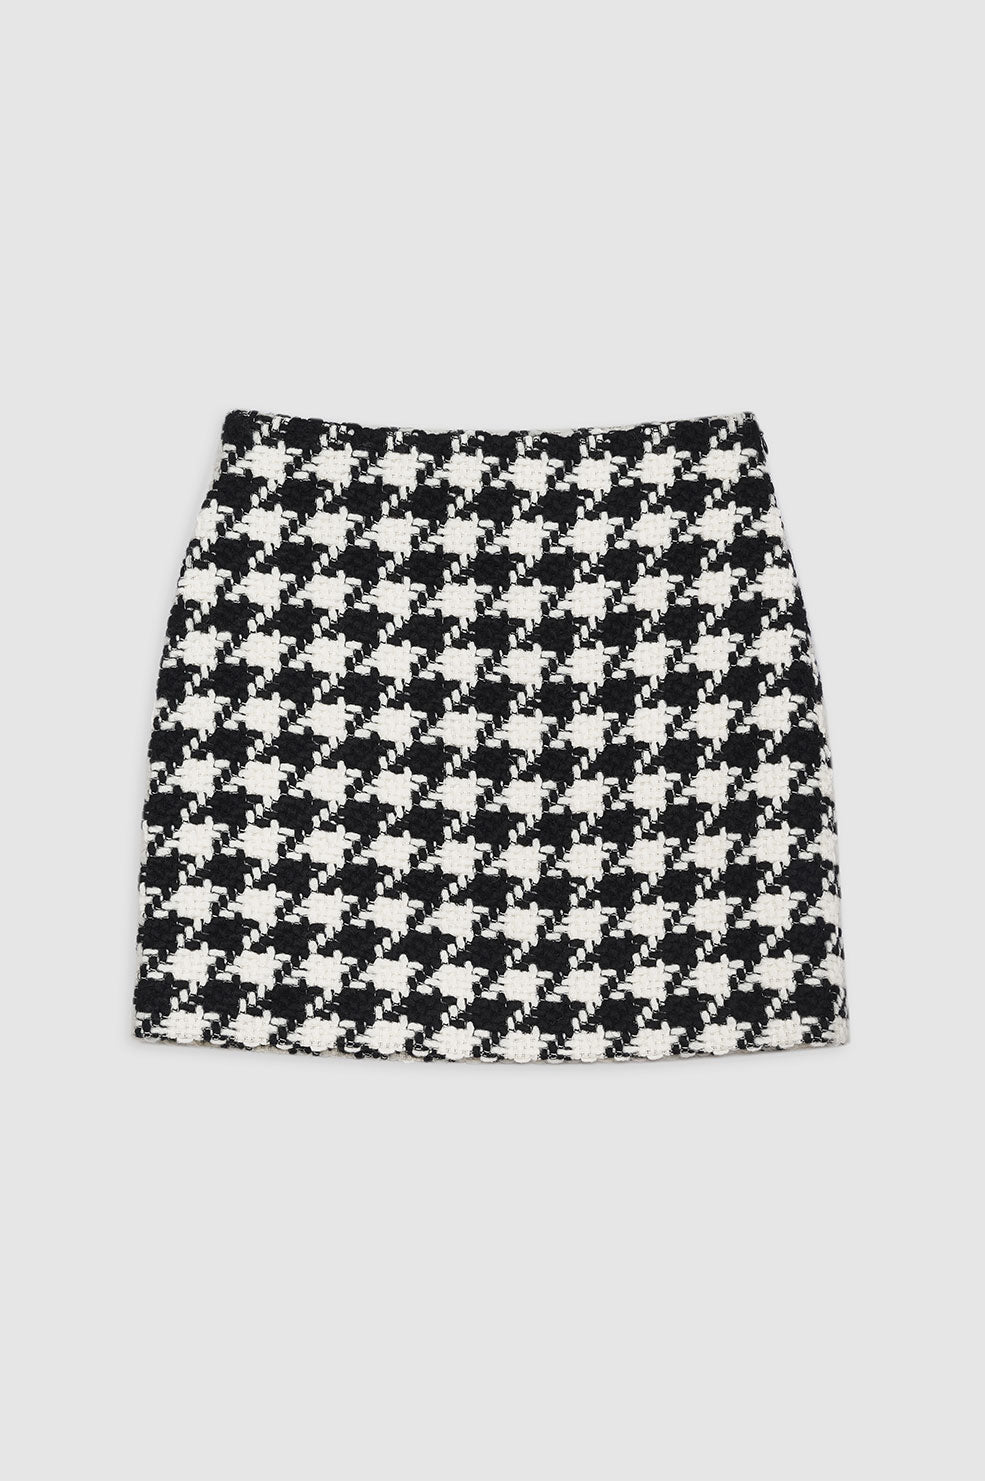 ANINE BING Ada Skirt - Black And White Houndstooth - Front View